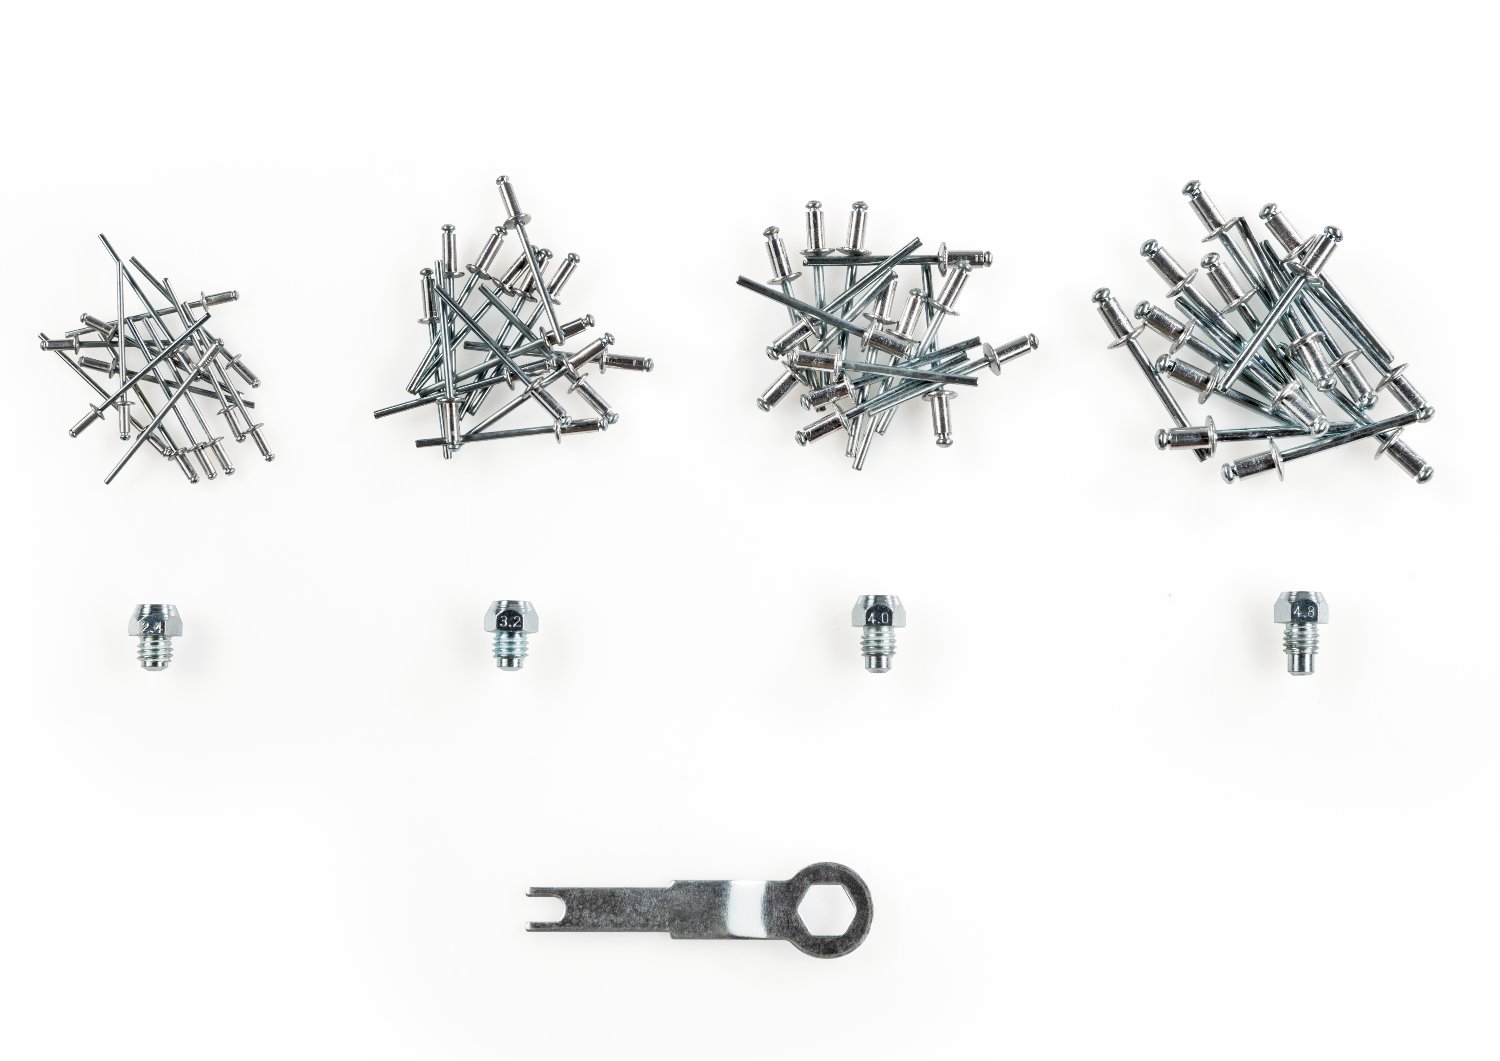 Available as a set including A2.4/A3/A4/A5 aluminium rivets (15 each), interchangeable mounts and mounting key.